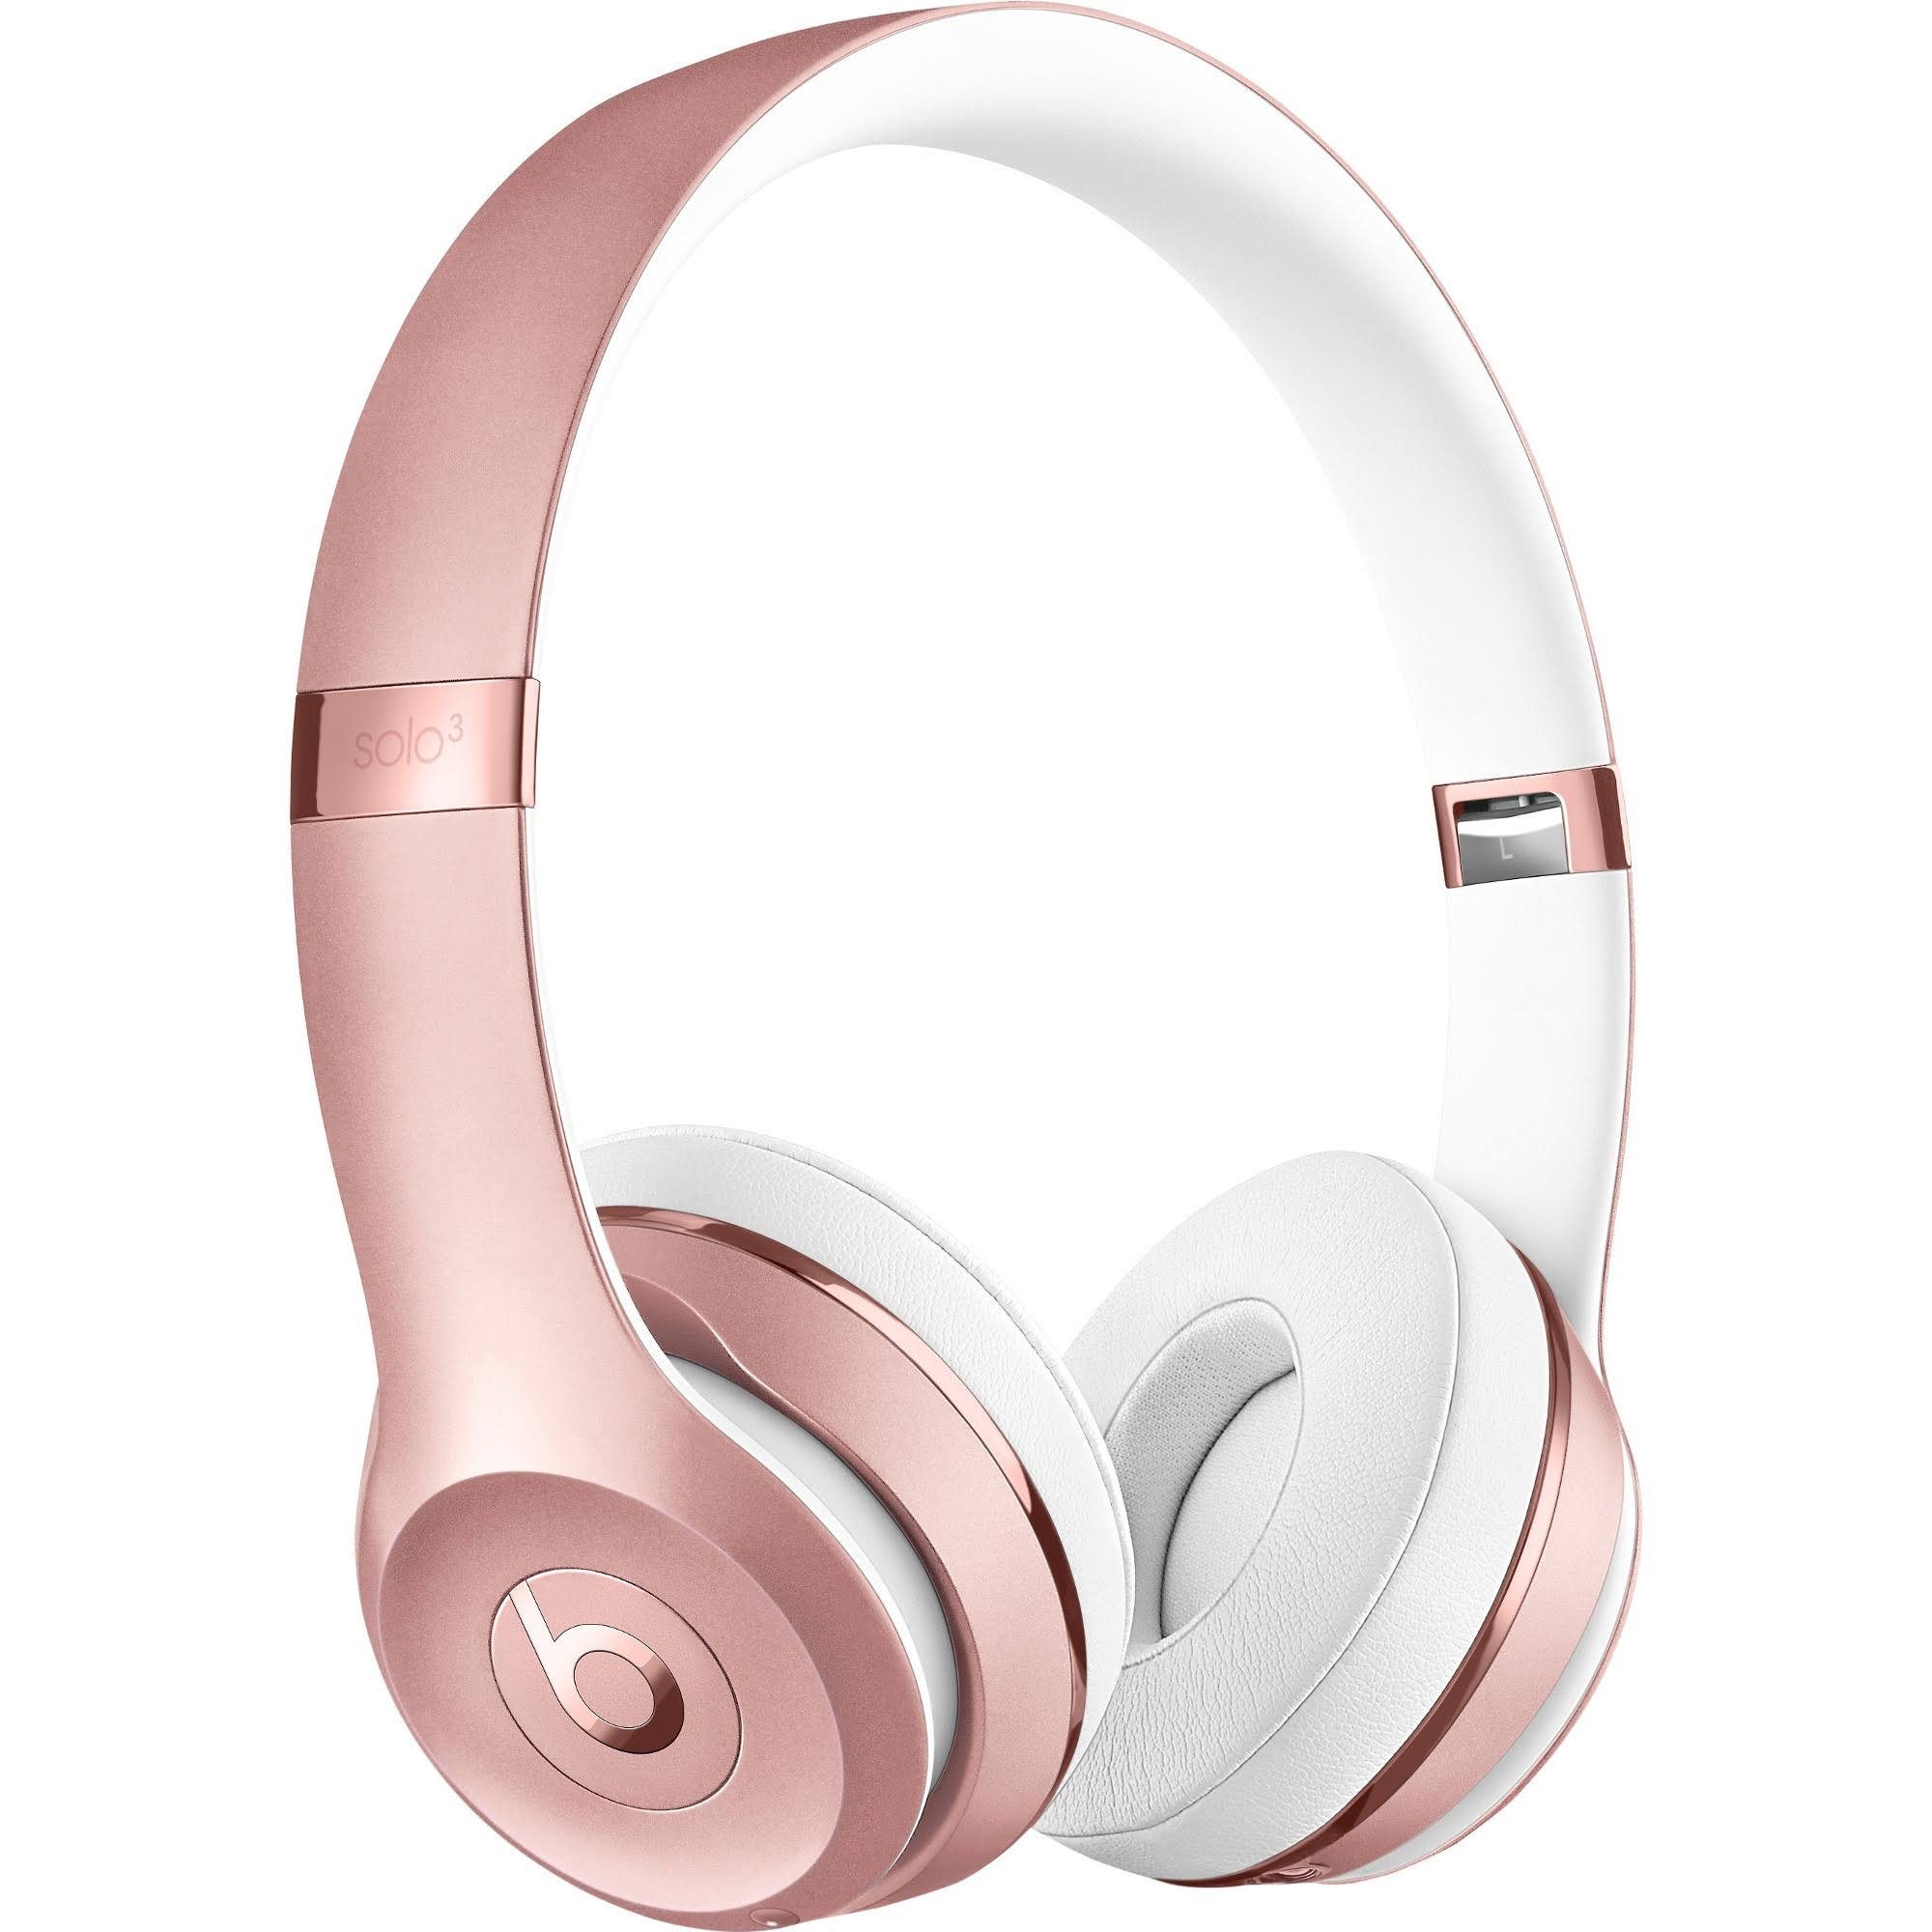 Official Beats by Dr. Dre - Solo³ Wireless On-Ear Headphones - Rose Gold